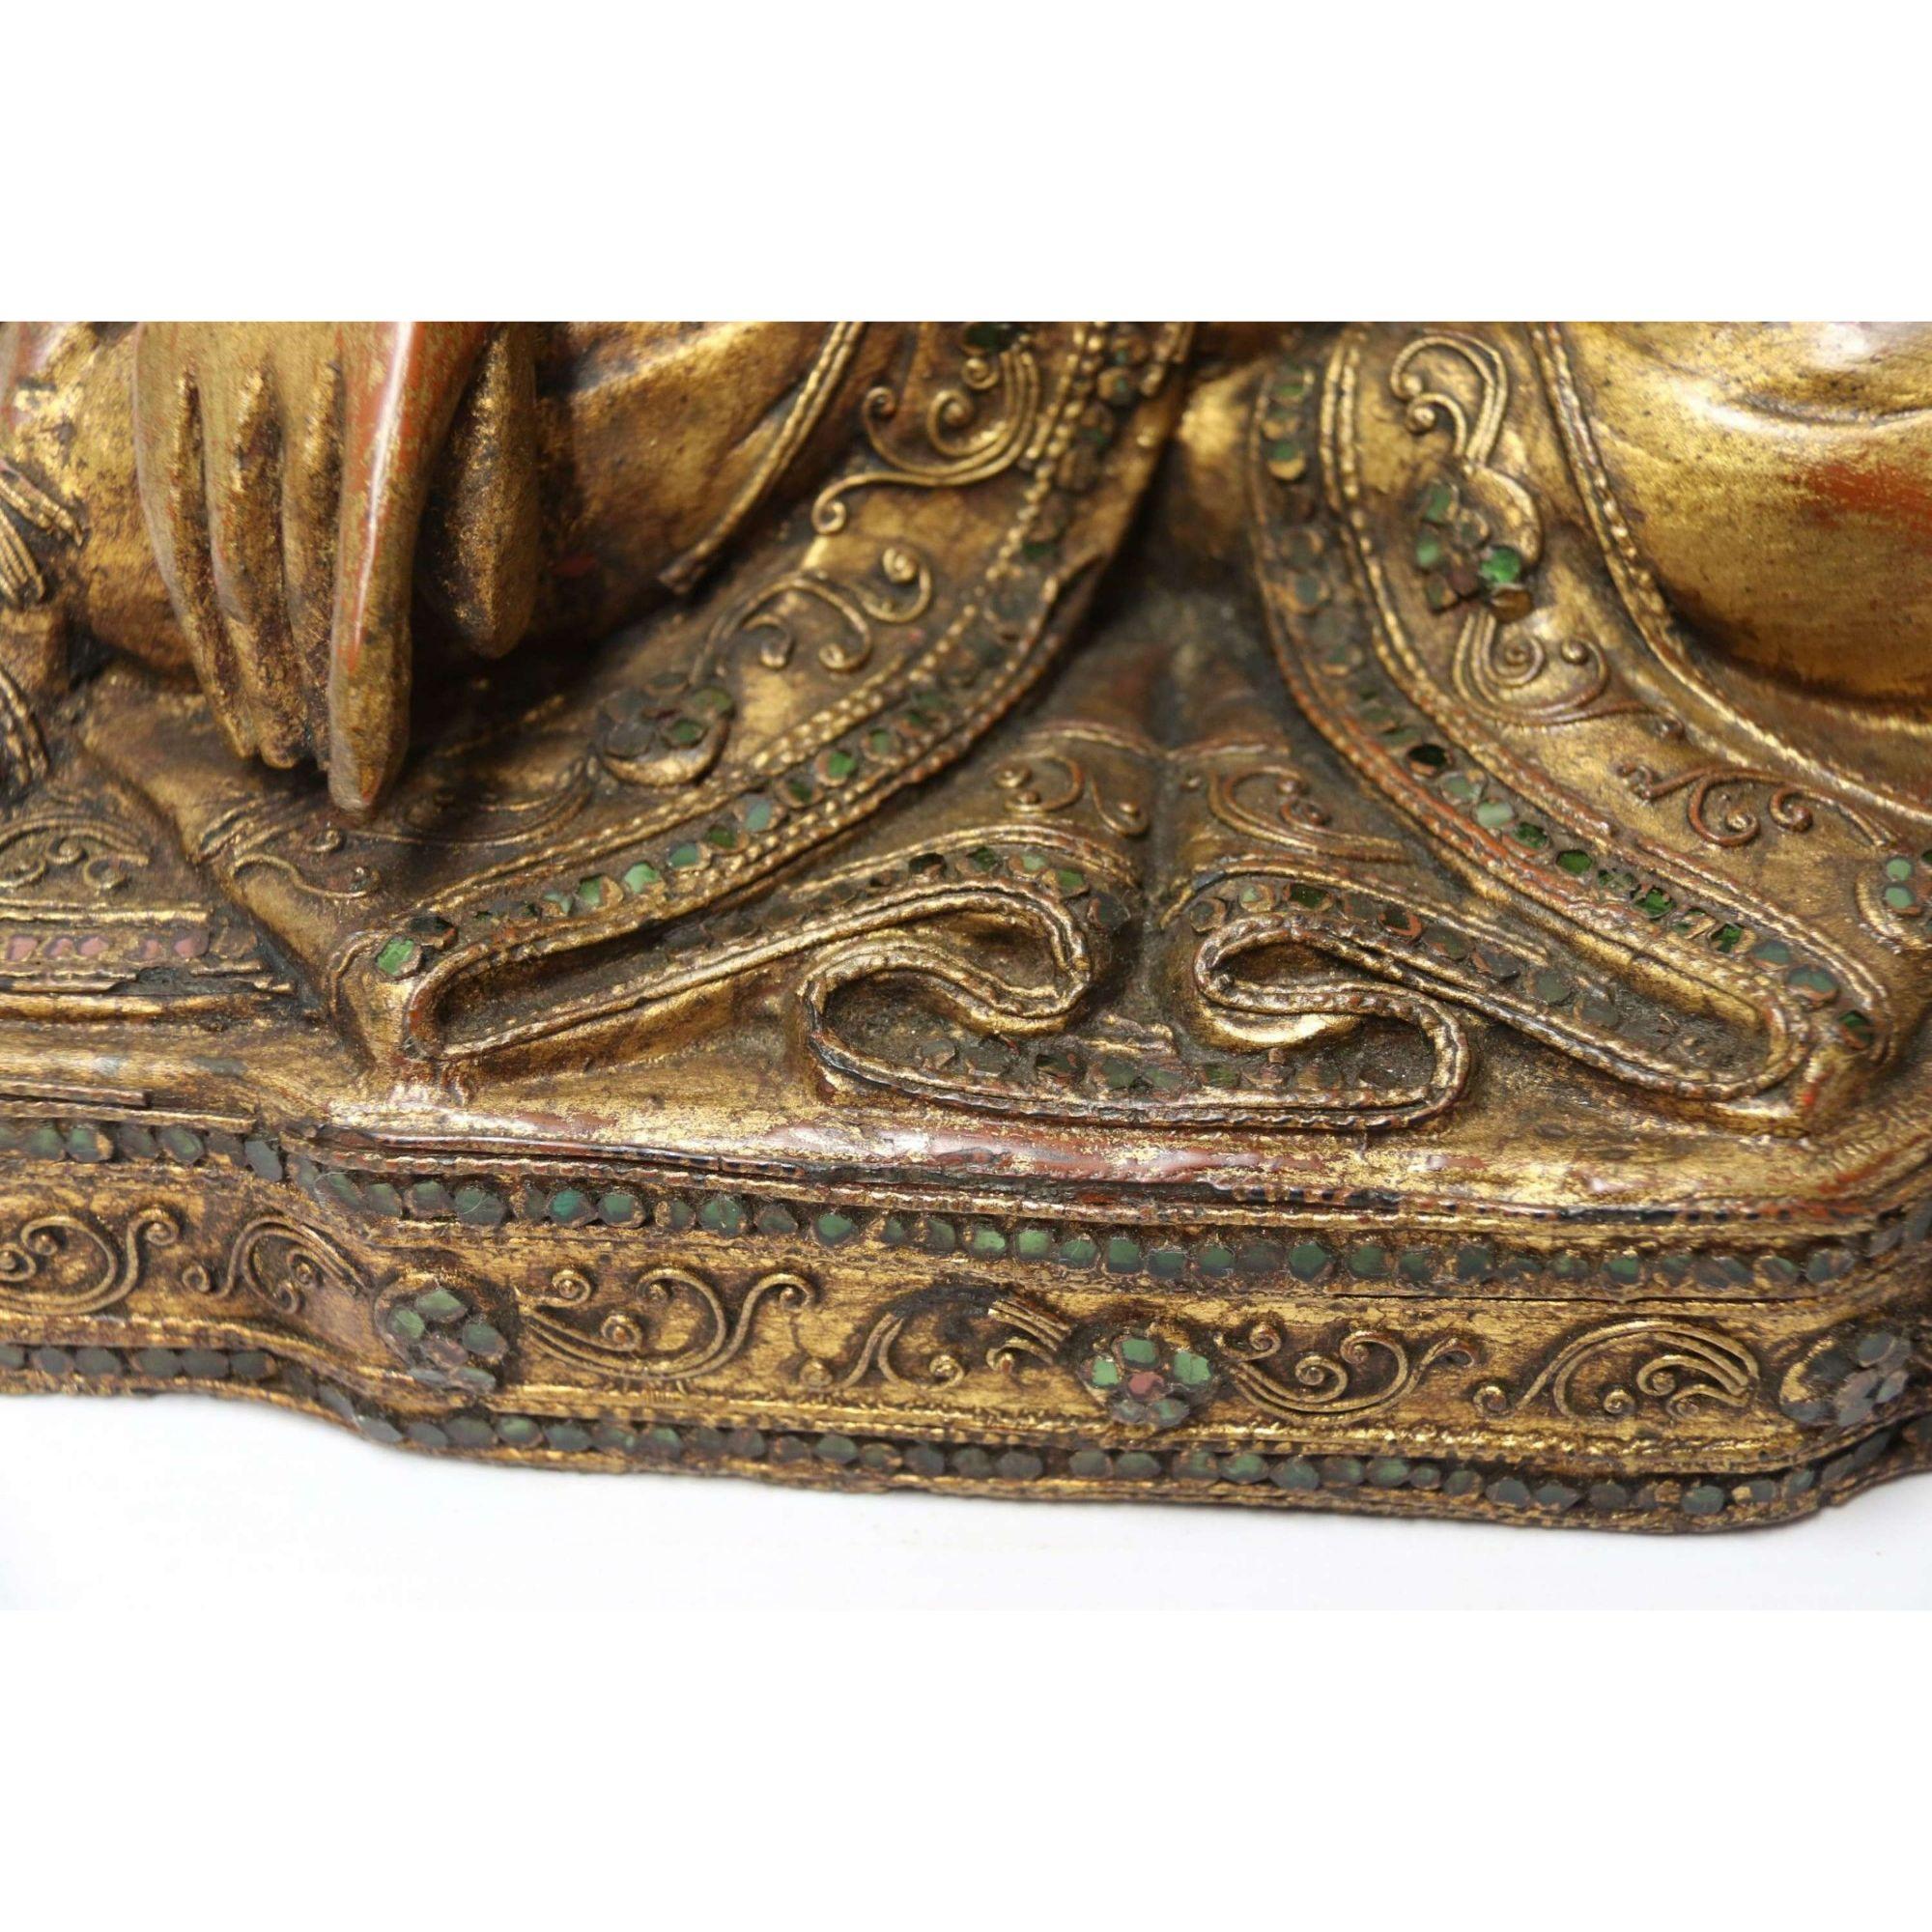 19th Century Asian Carved Gilt Wood Buddha, with Inlaid Glass Eyes, circa 1900 For Sale 6